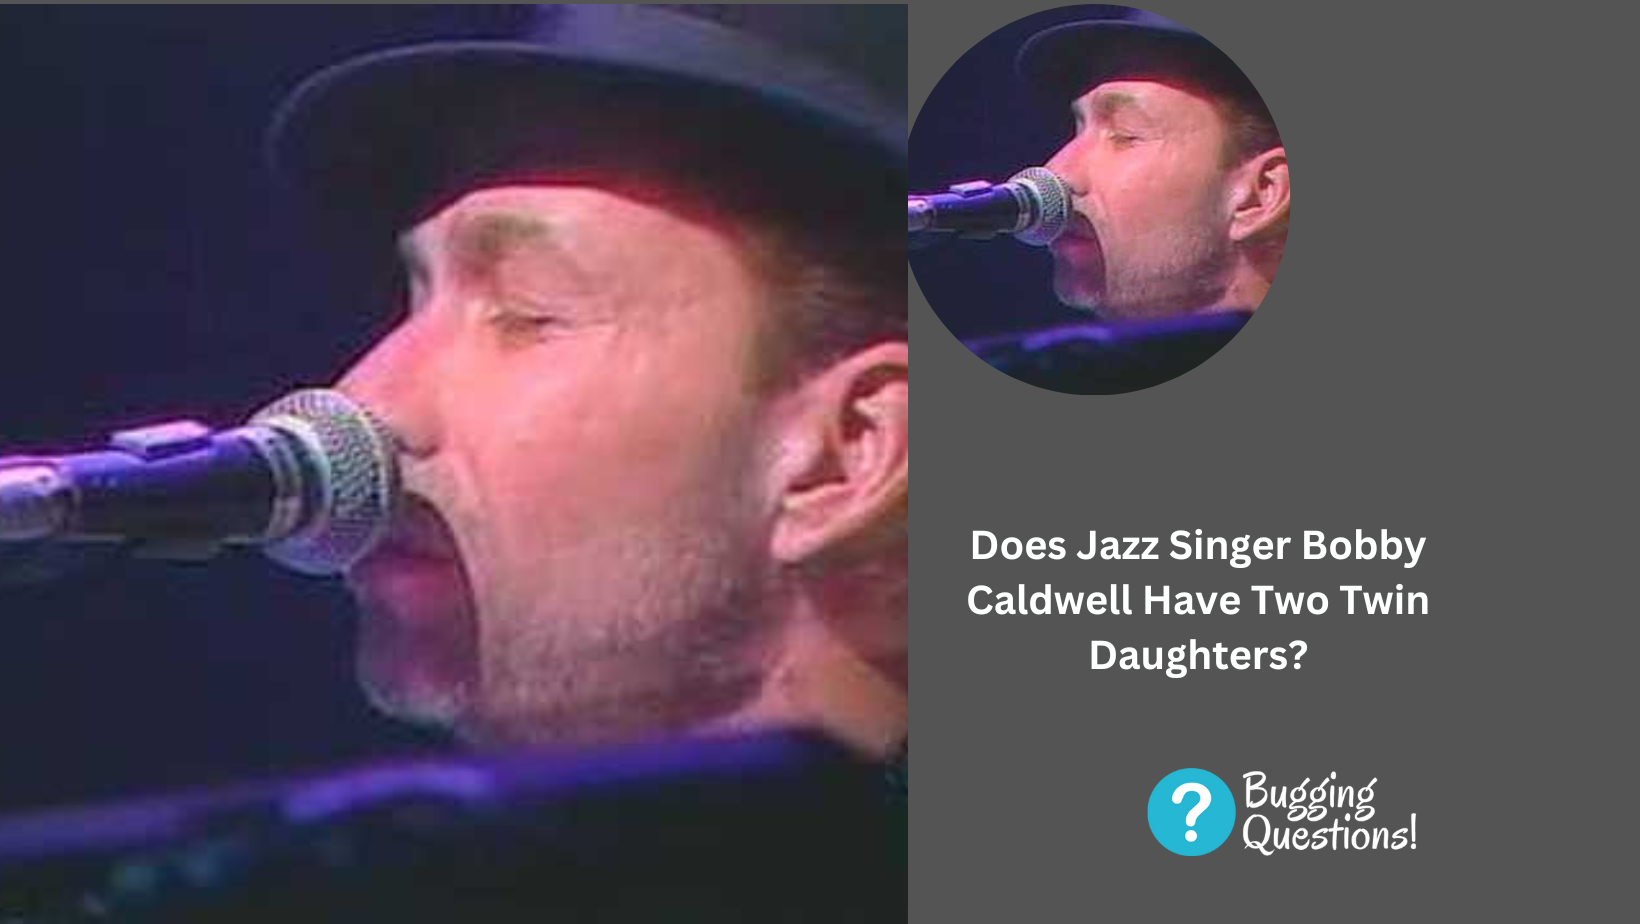 Does Jazz Singer Bobby Caldwell Have Two Twin Daughters?